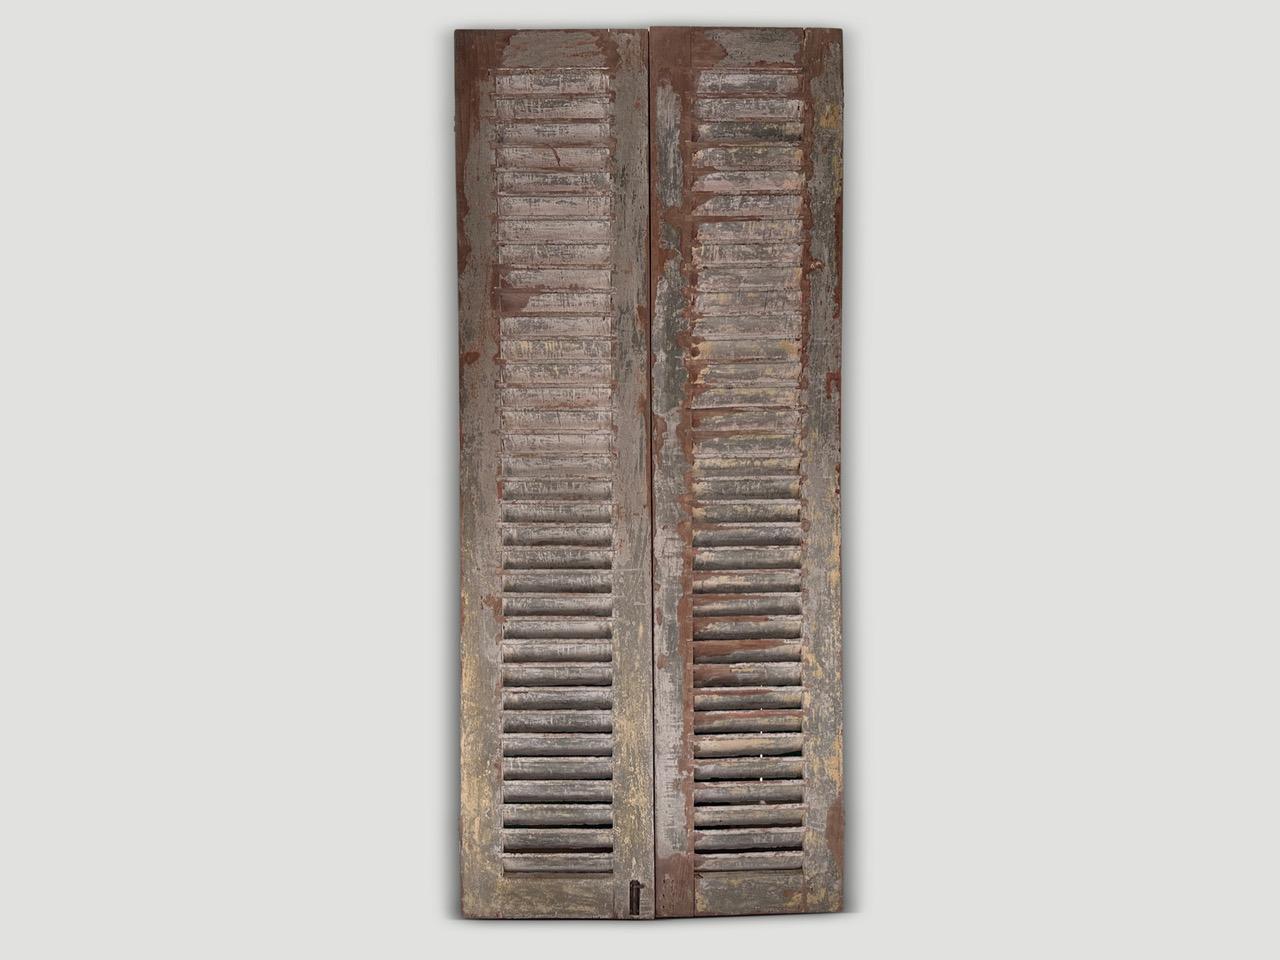 Stunningly beautiful antique shutters with the remnants of the original color, over the natural aged teak wood. Circa 1940. Full dimensions; 100” high x 44” wide x 1.5 thick frame, plus bevel at 3” total thickness.

A set of beautiful shutters hand